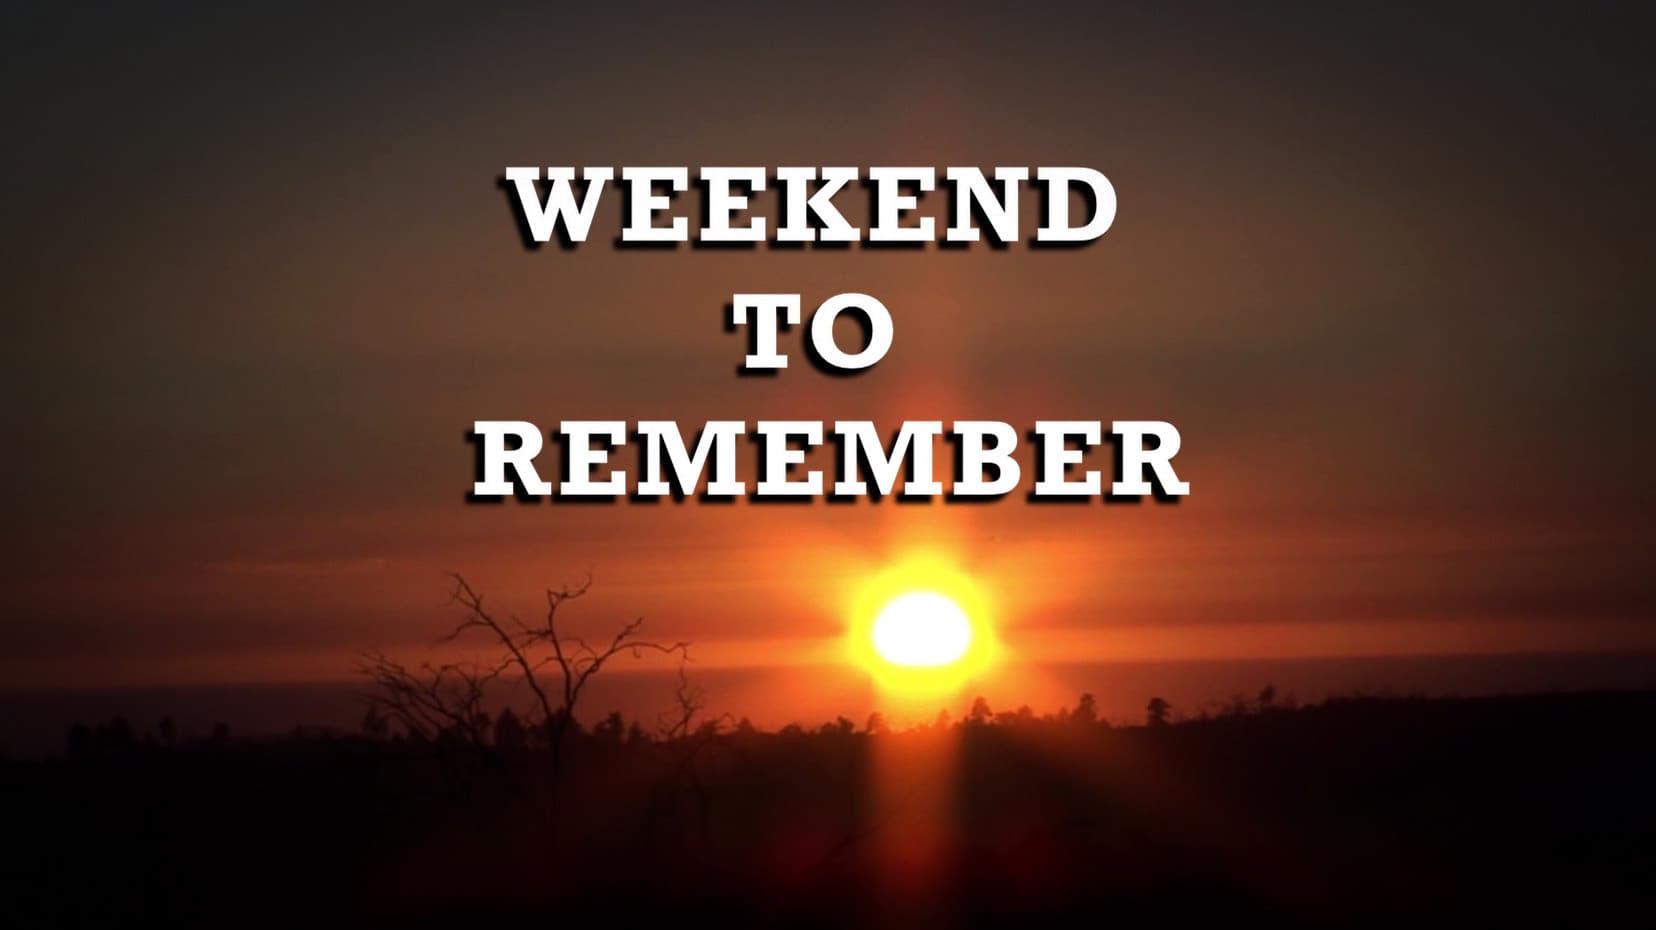 Weekend to Remember backdrop